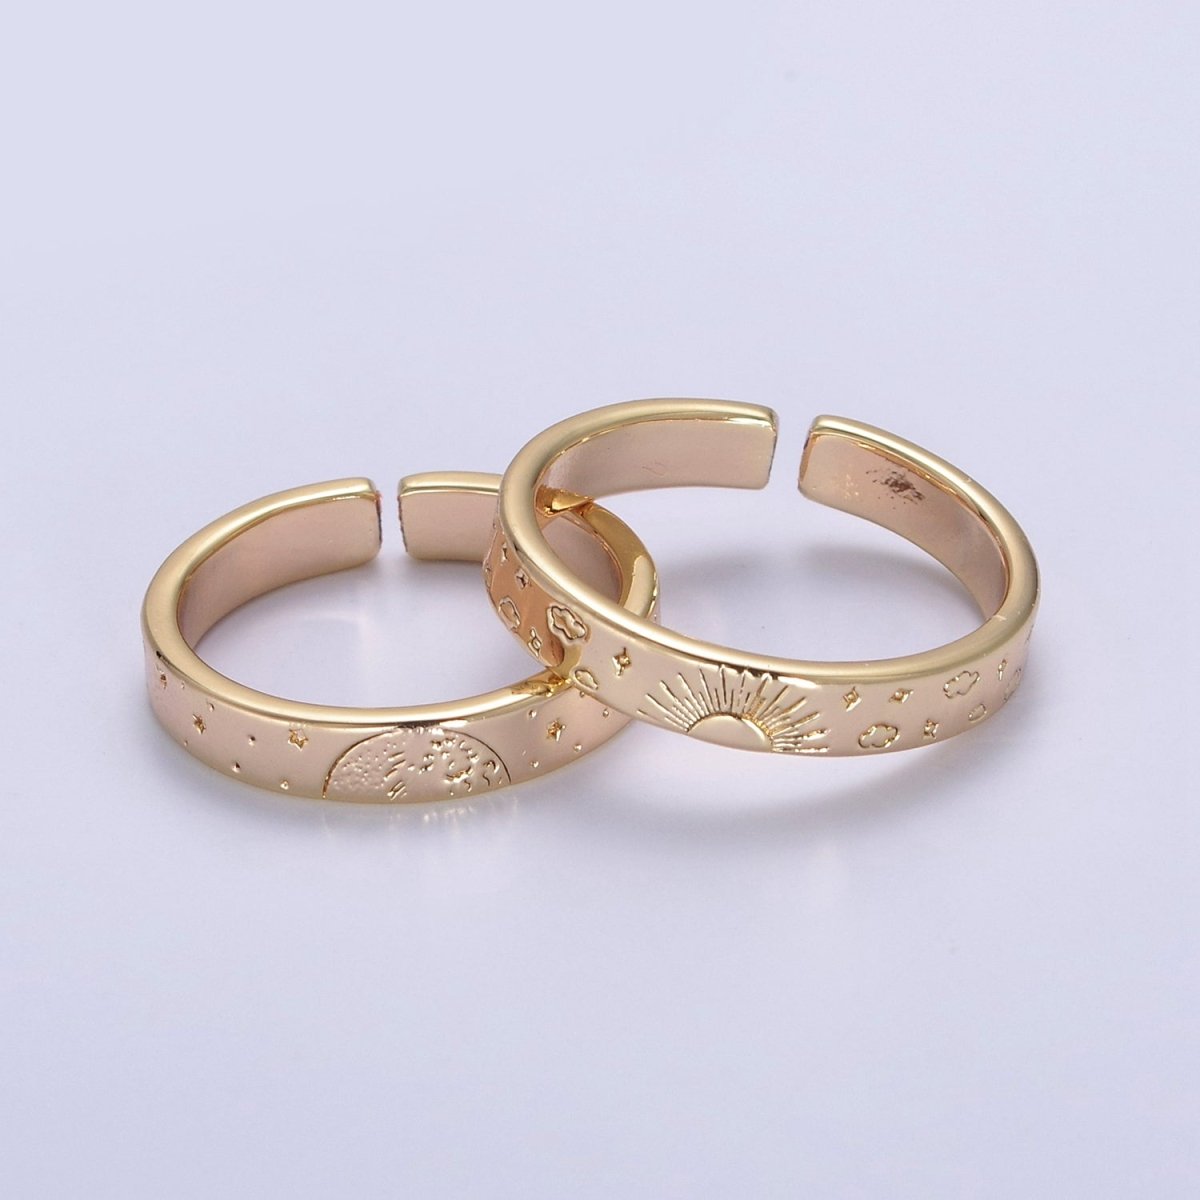 Gold Celestial Astronomy RING SET, Engraved Sun & Moon & Stars Gold Band Rings, 16K Gold Filled Adjustable Rings U-442 - DLUXCA